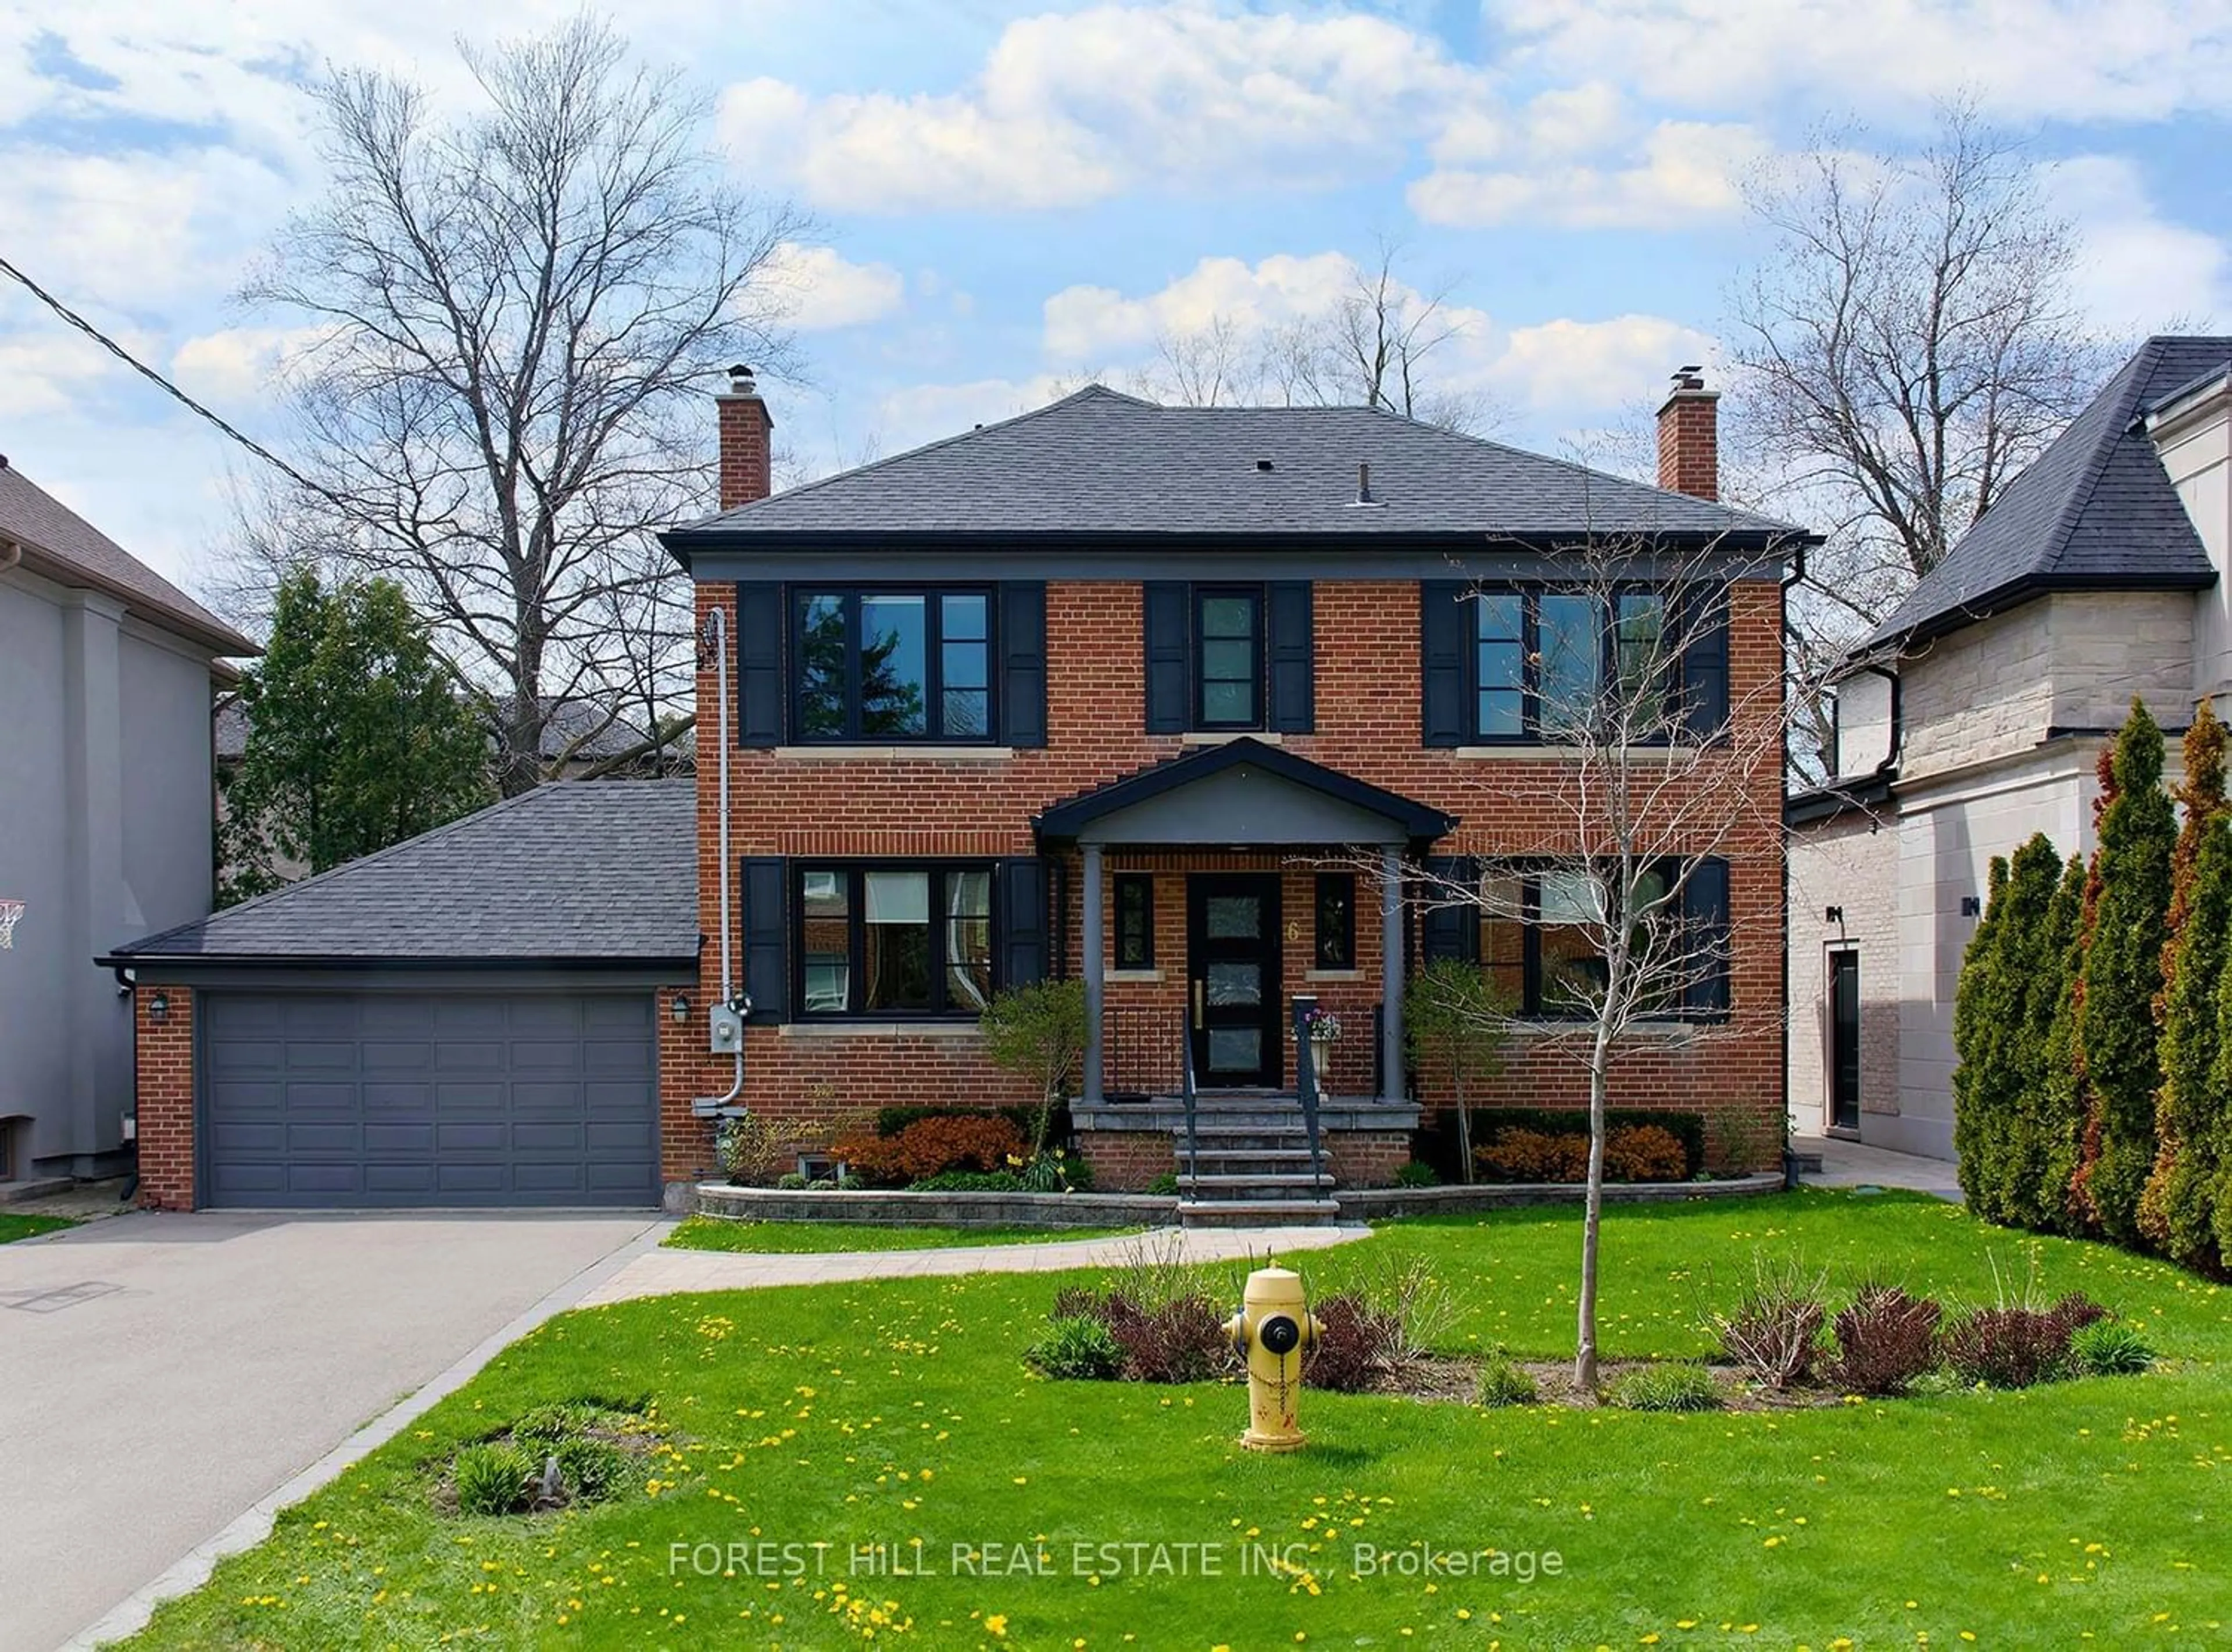 Home with brick exterior material for 6 Kirkton Rd, Toronto Ontario M3H 1K7